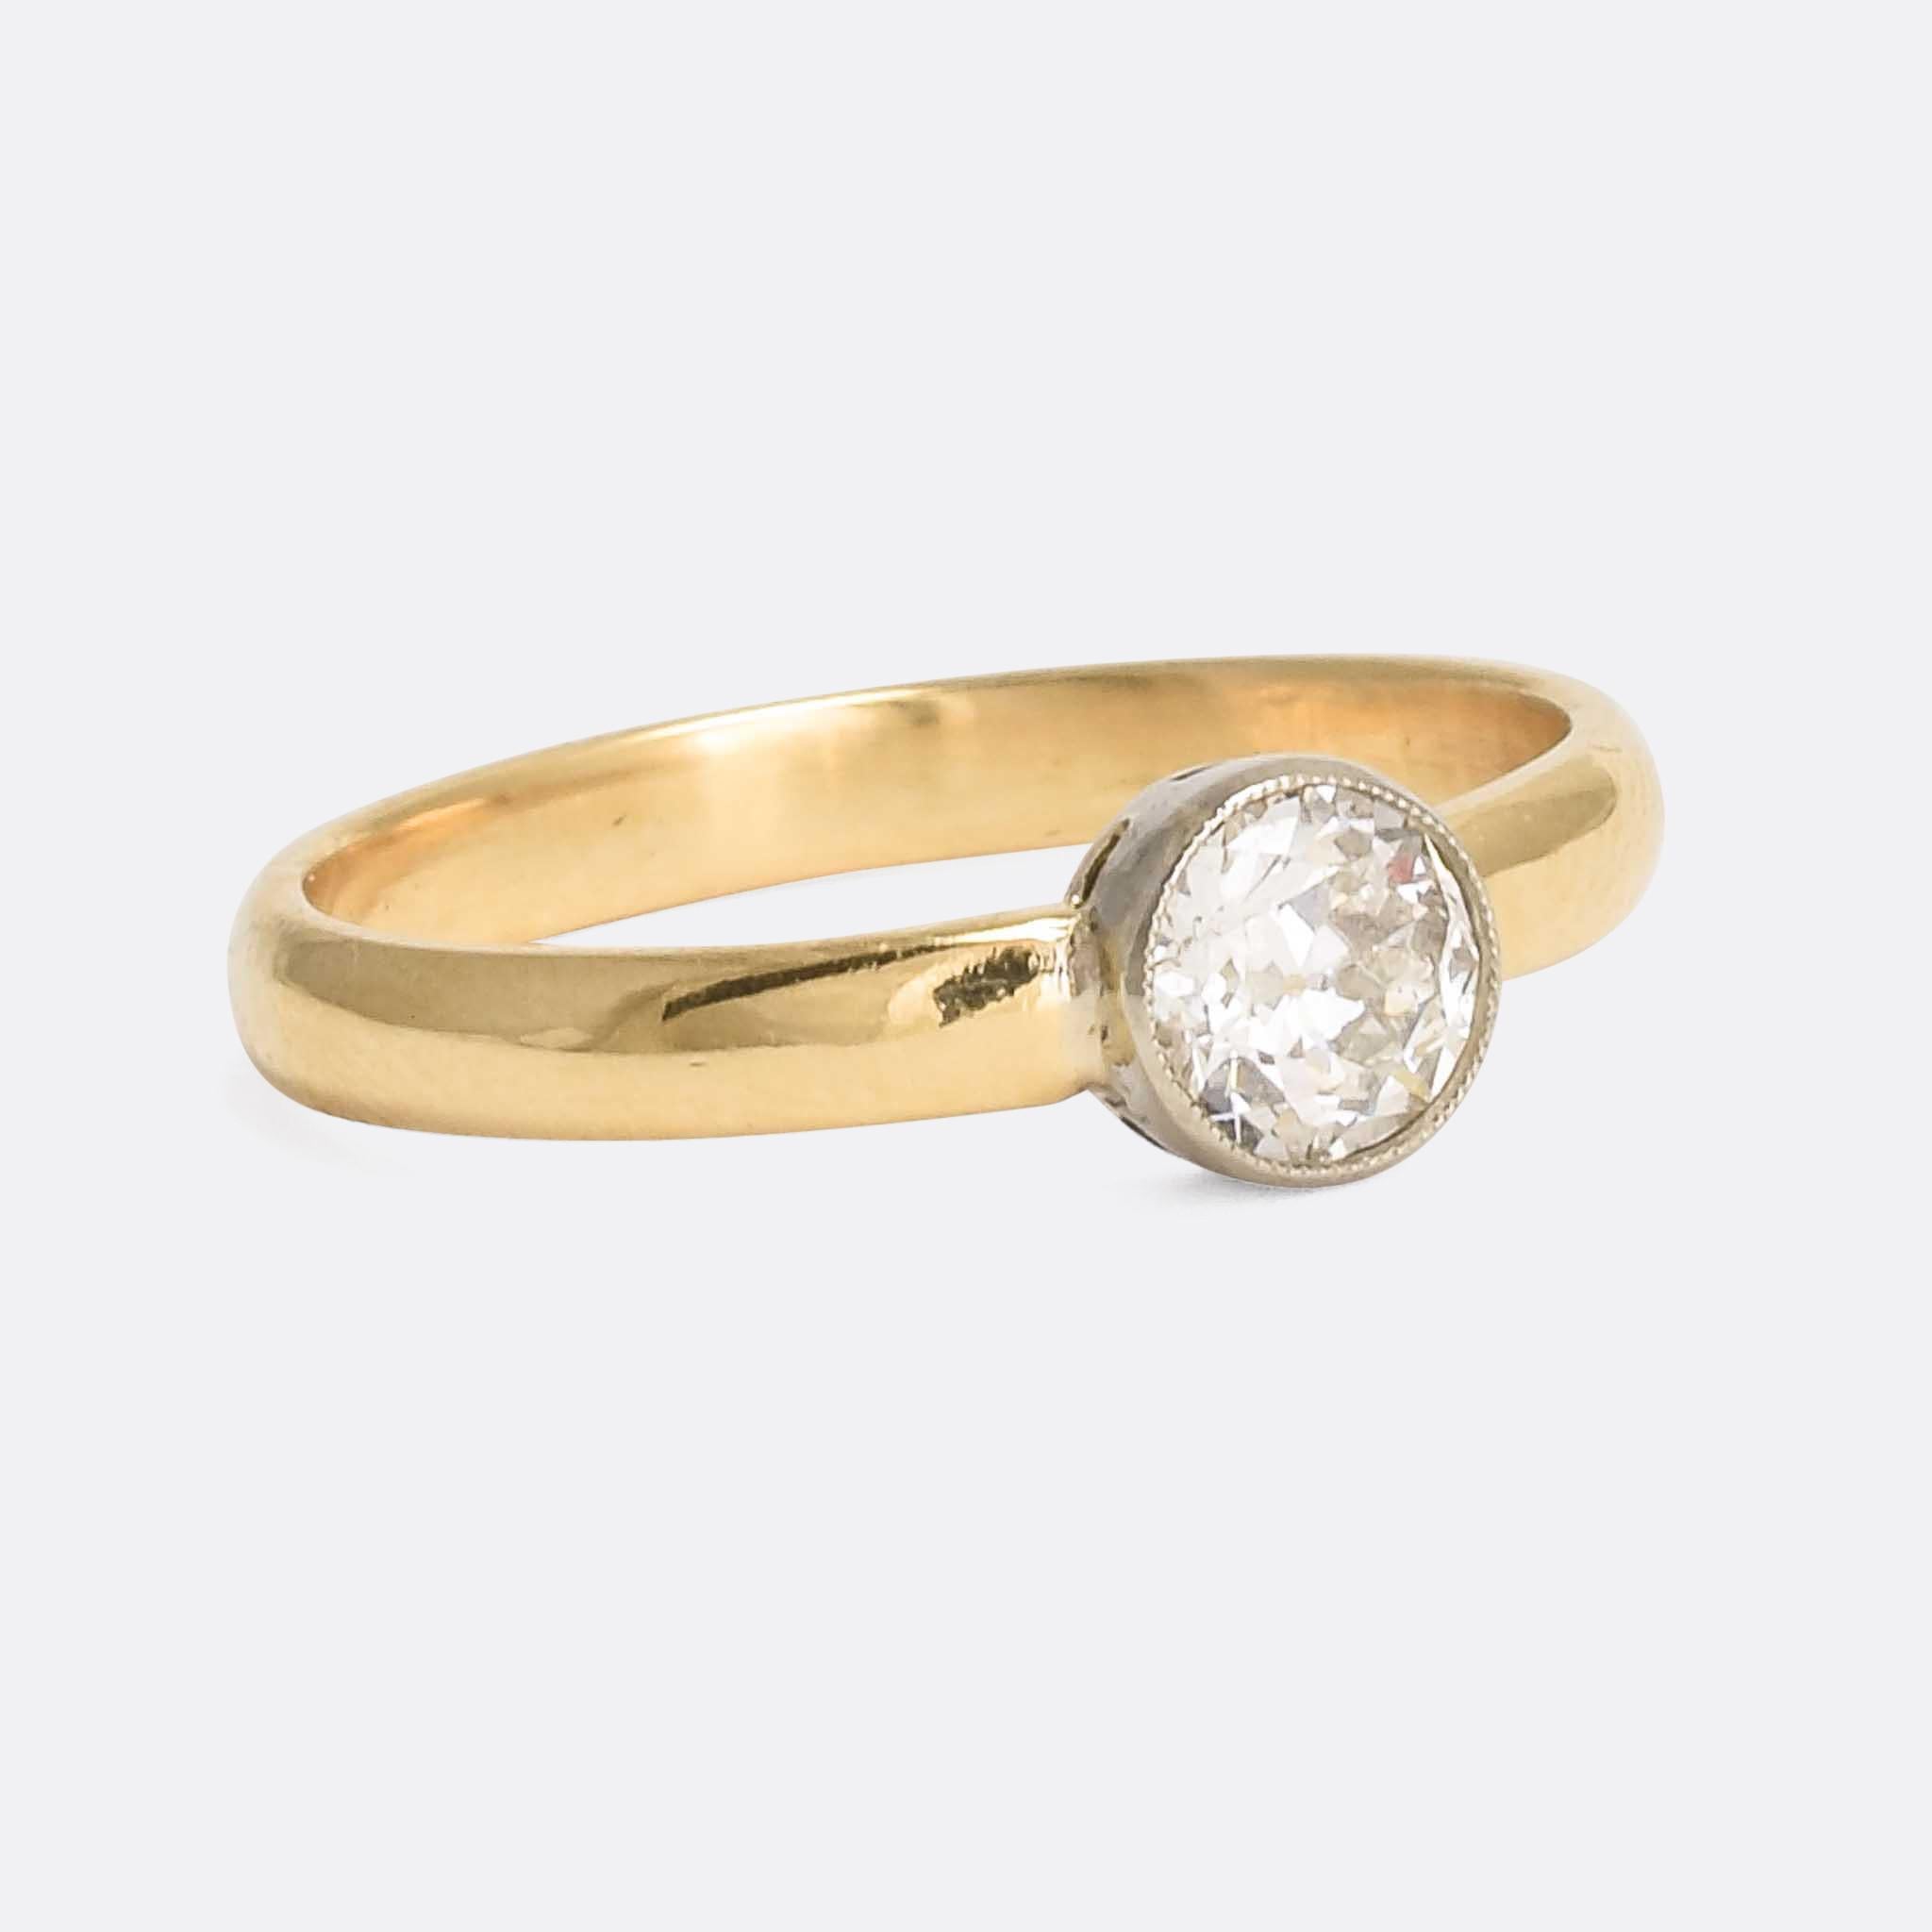 A sleek and simple diamond solitaire ring dating from the Edwardian era. The stone is a beautiful .50ct old European cut diamond; it rests in a simple millegrain collet setting, with excellent colour and clarity grades. Modelled in 18k gold and